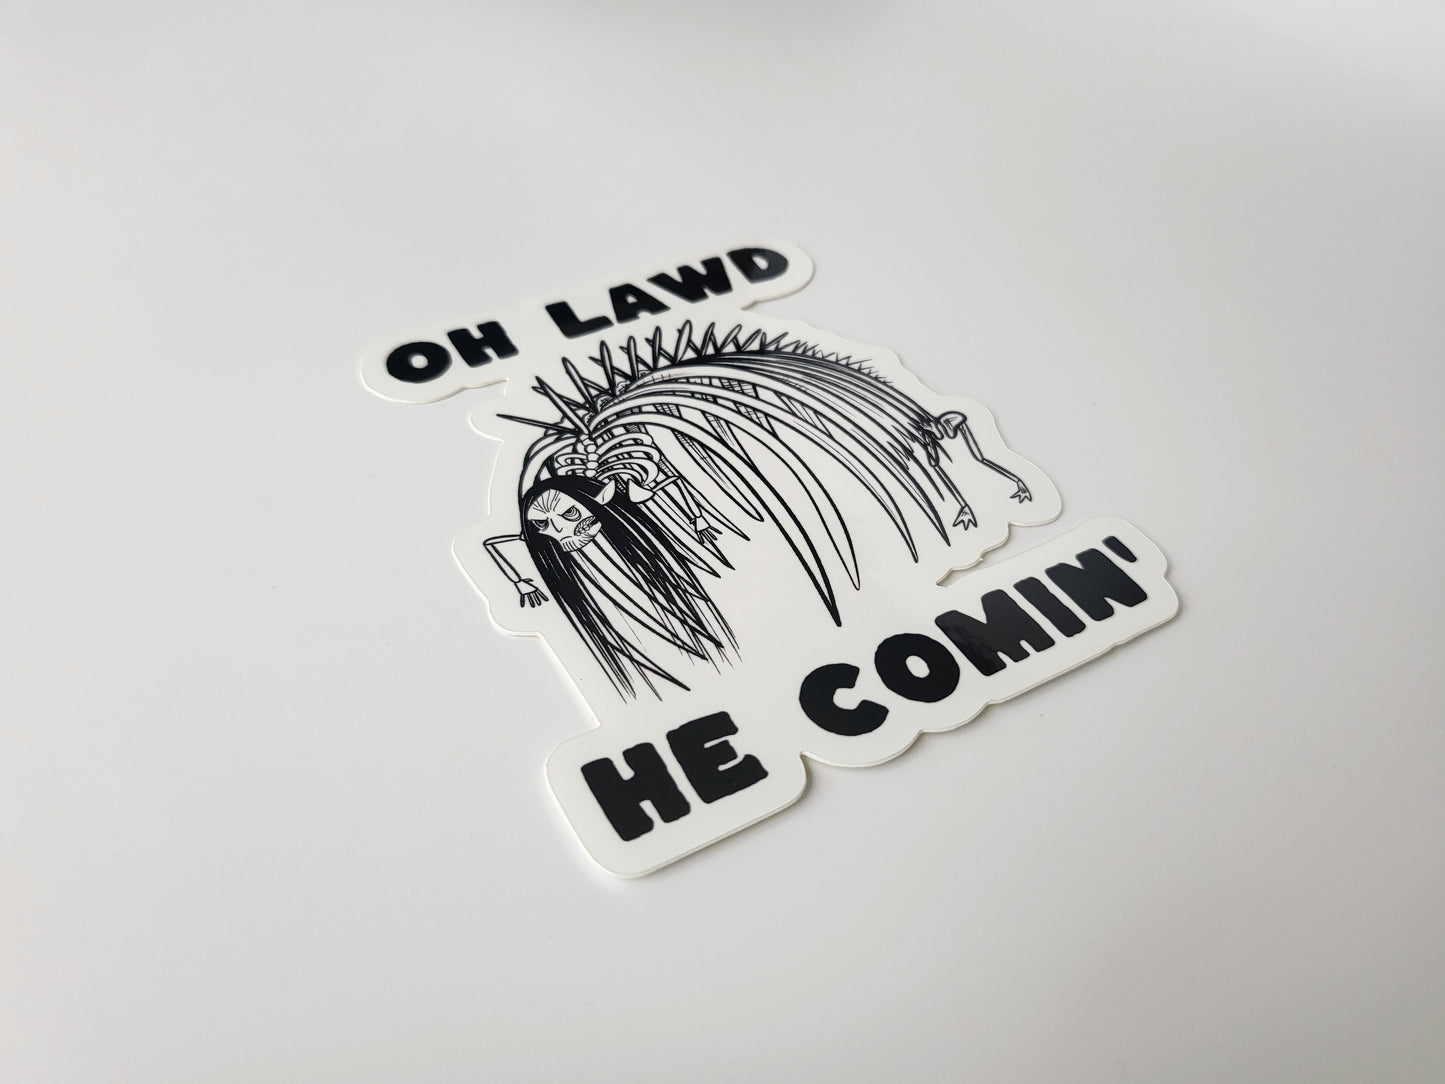 Oh Lawd He Comin - Eren Yeager Sticker for Attack on Titan fans